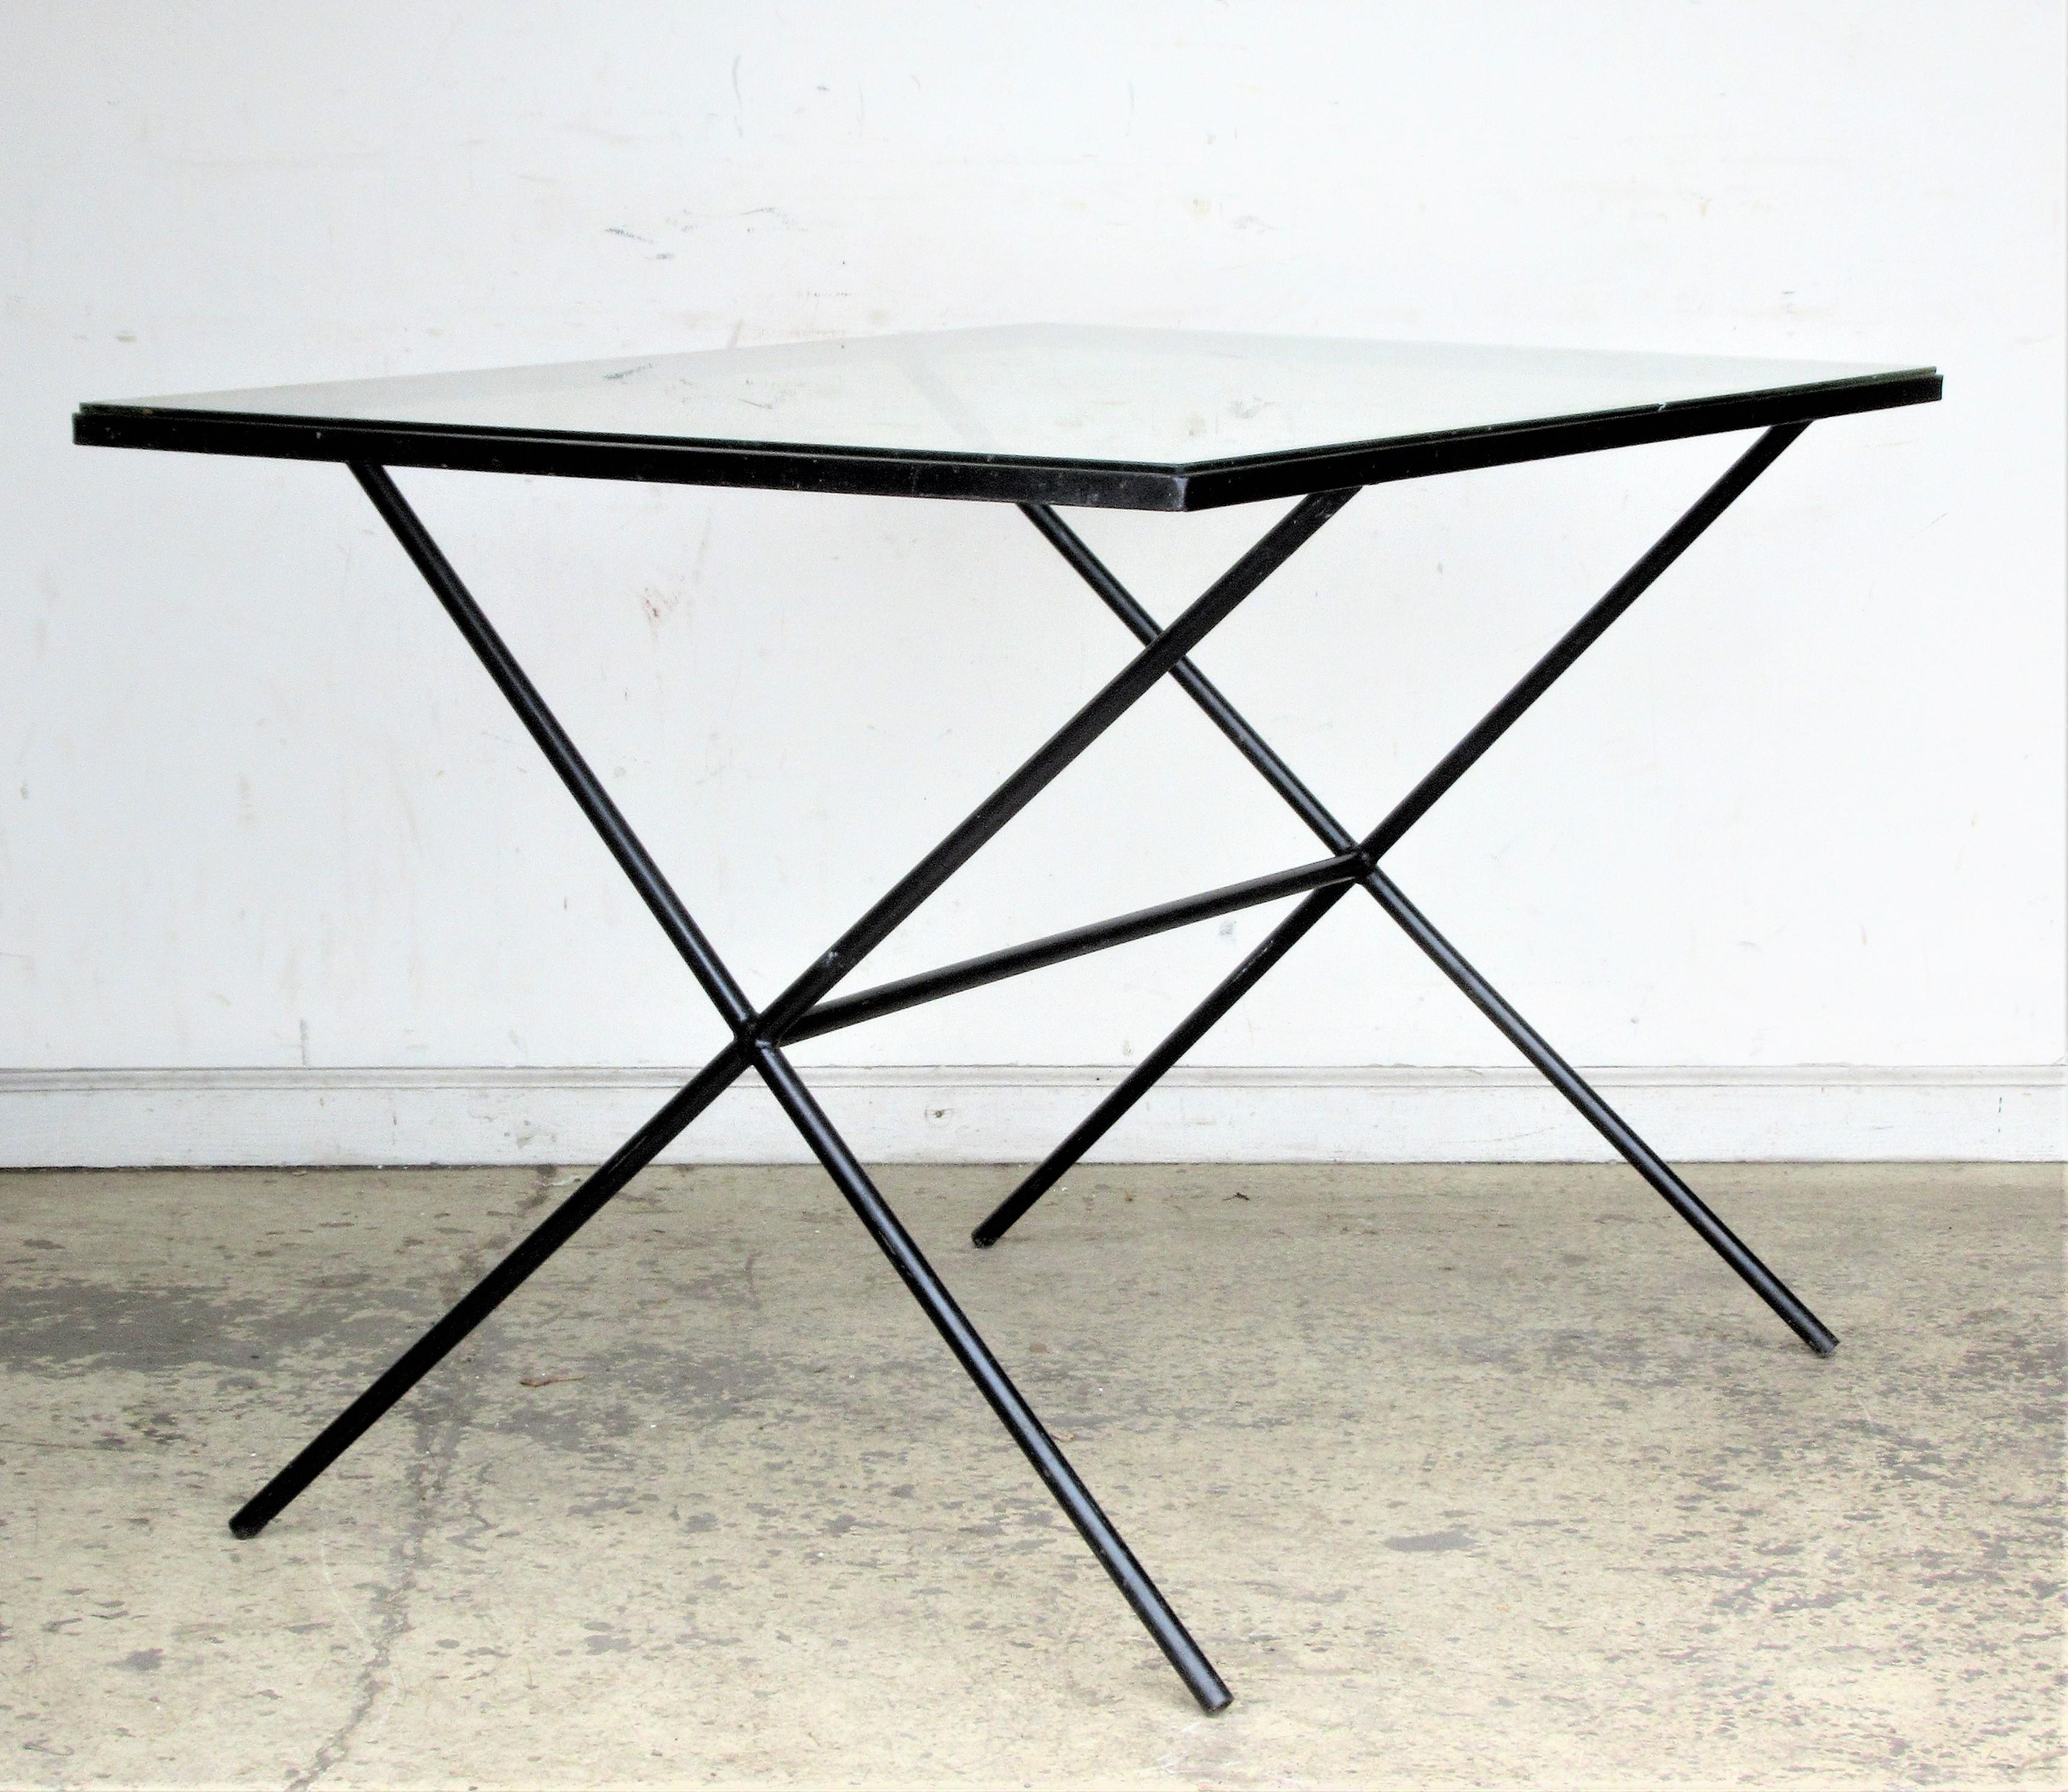 20th Century  Architectural Modernist Iron Table by Muriel Coleman